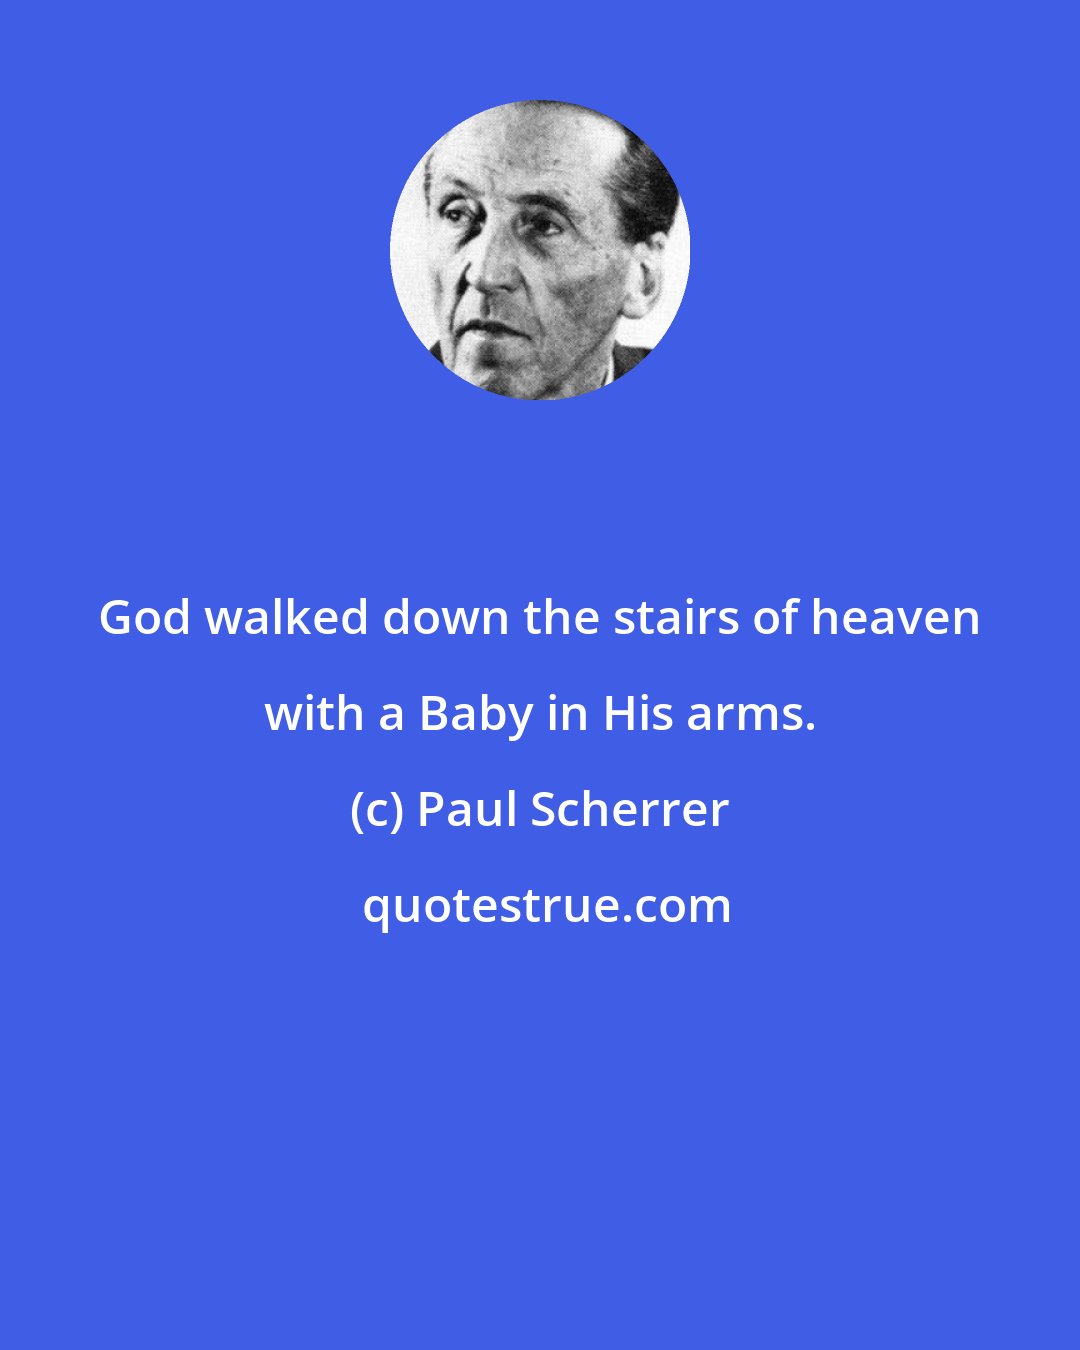 Paul Scherrer: God walked down the stairs of heaven with a Baby in His arms.